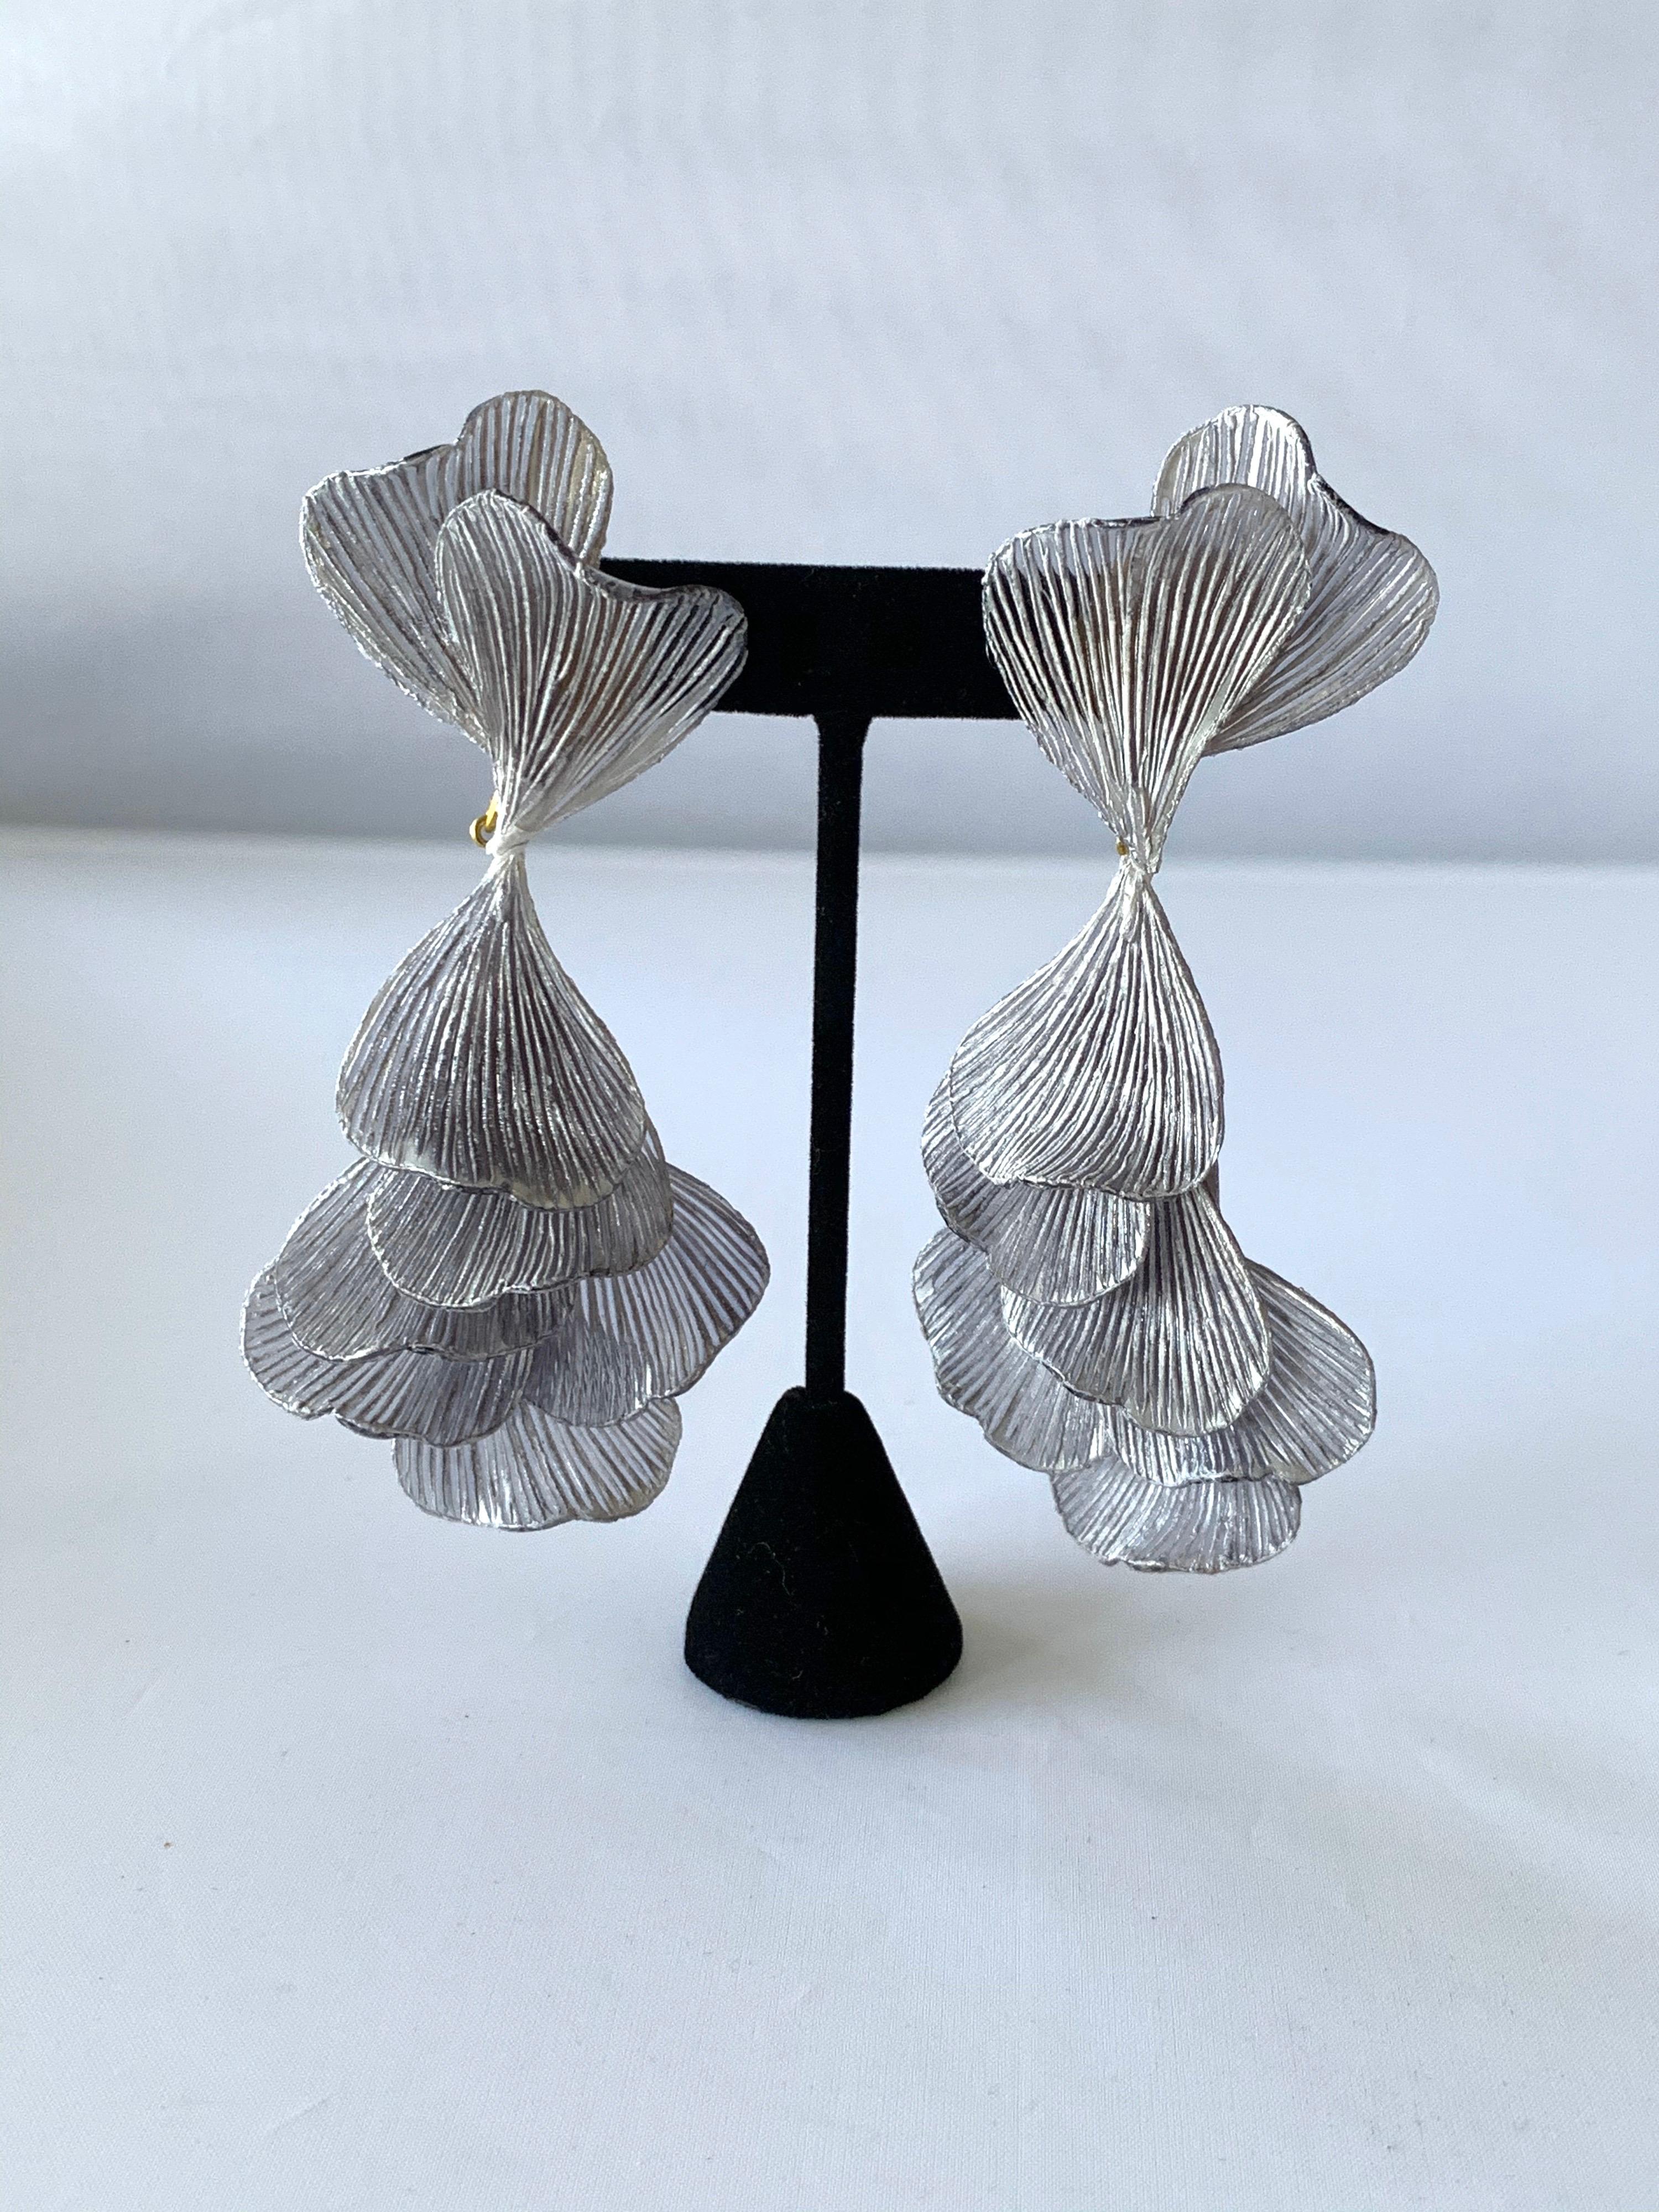 Light and easy to wear, these handmade artisanal clip-on earrings were made in Paris by Cilea. The lightweight clip-on earrings feature molded wave segments of enameline (enamel and resin composite) in grey, almost resembling whimsical fishtails.